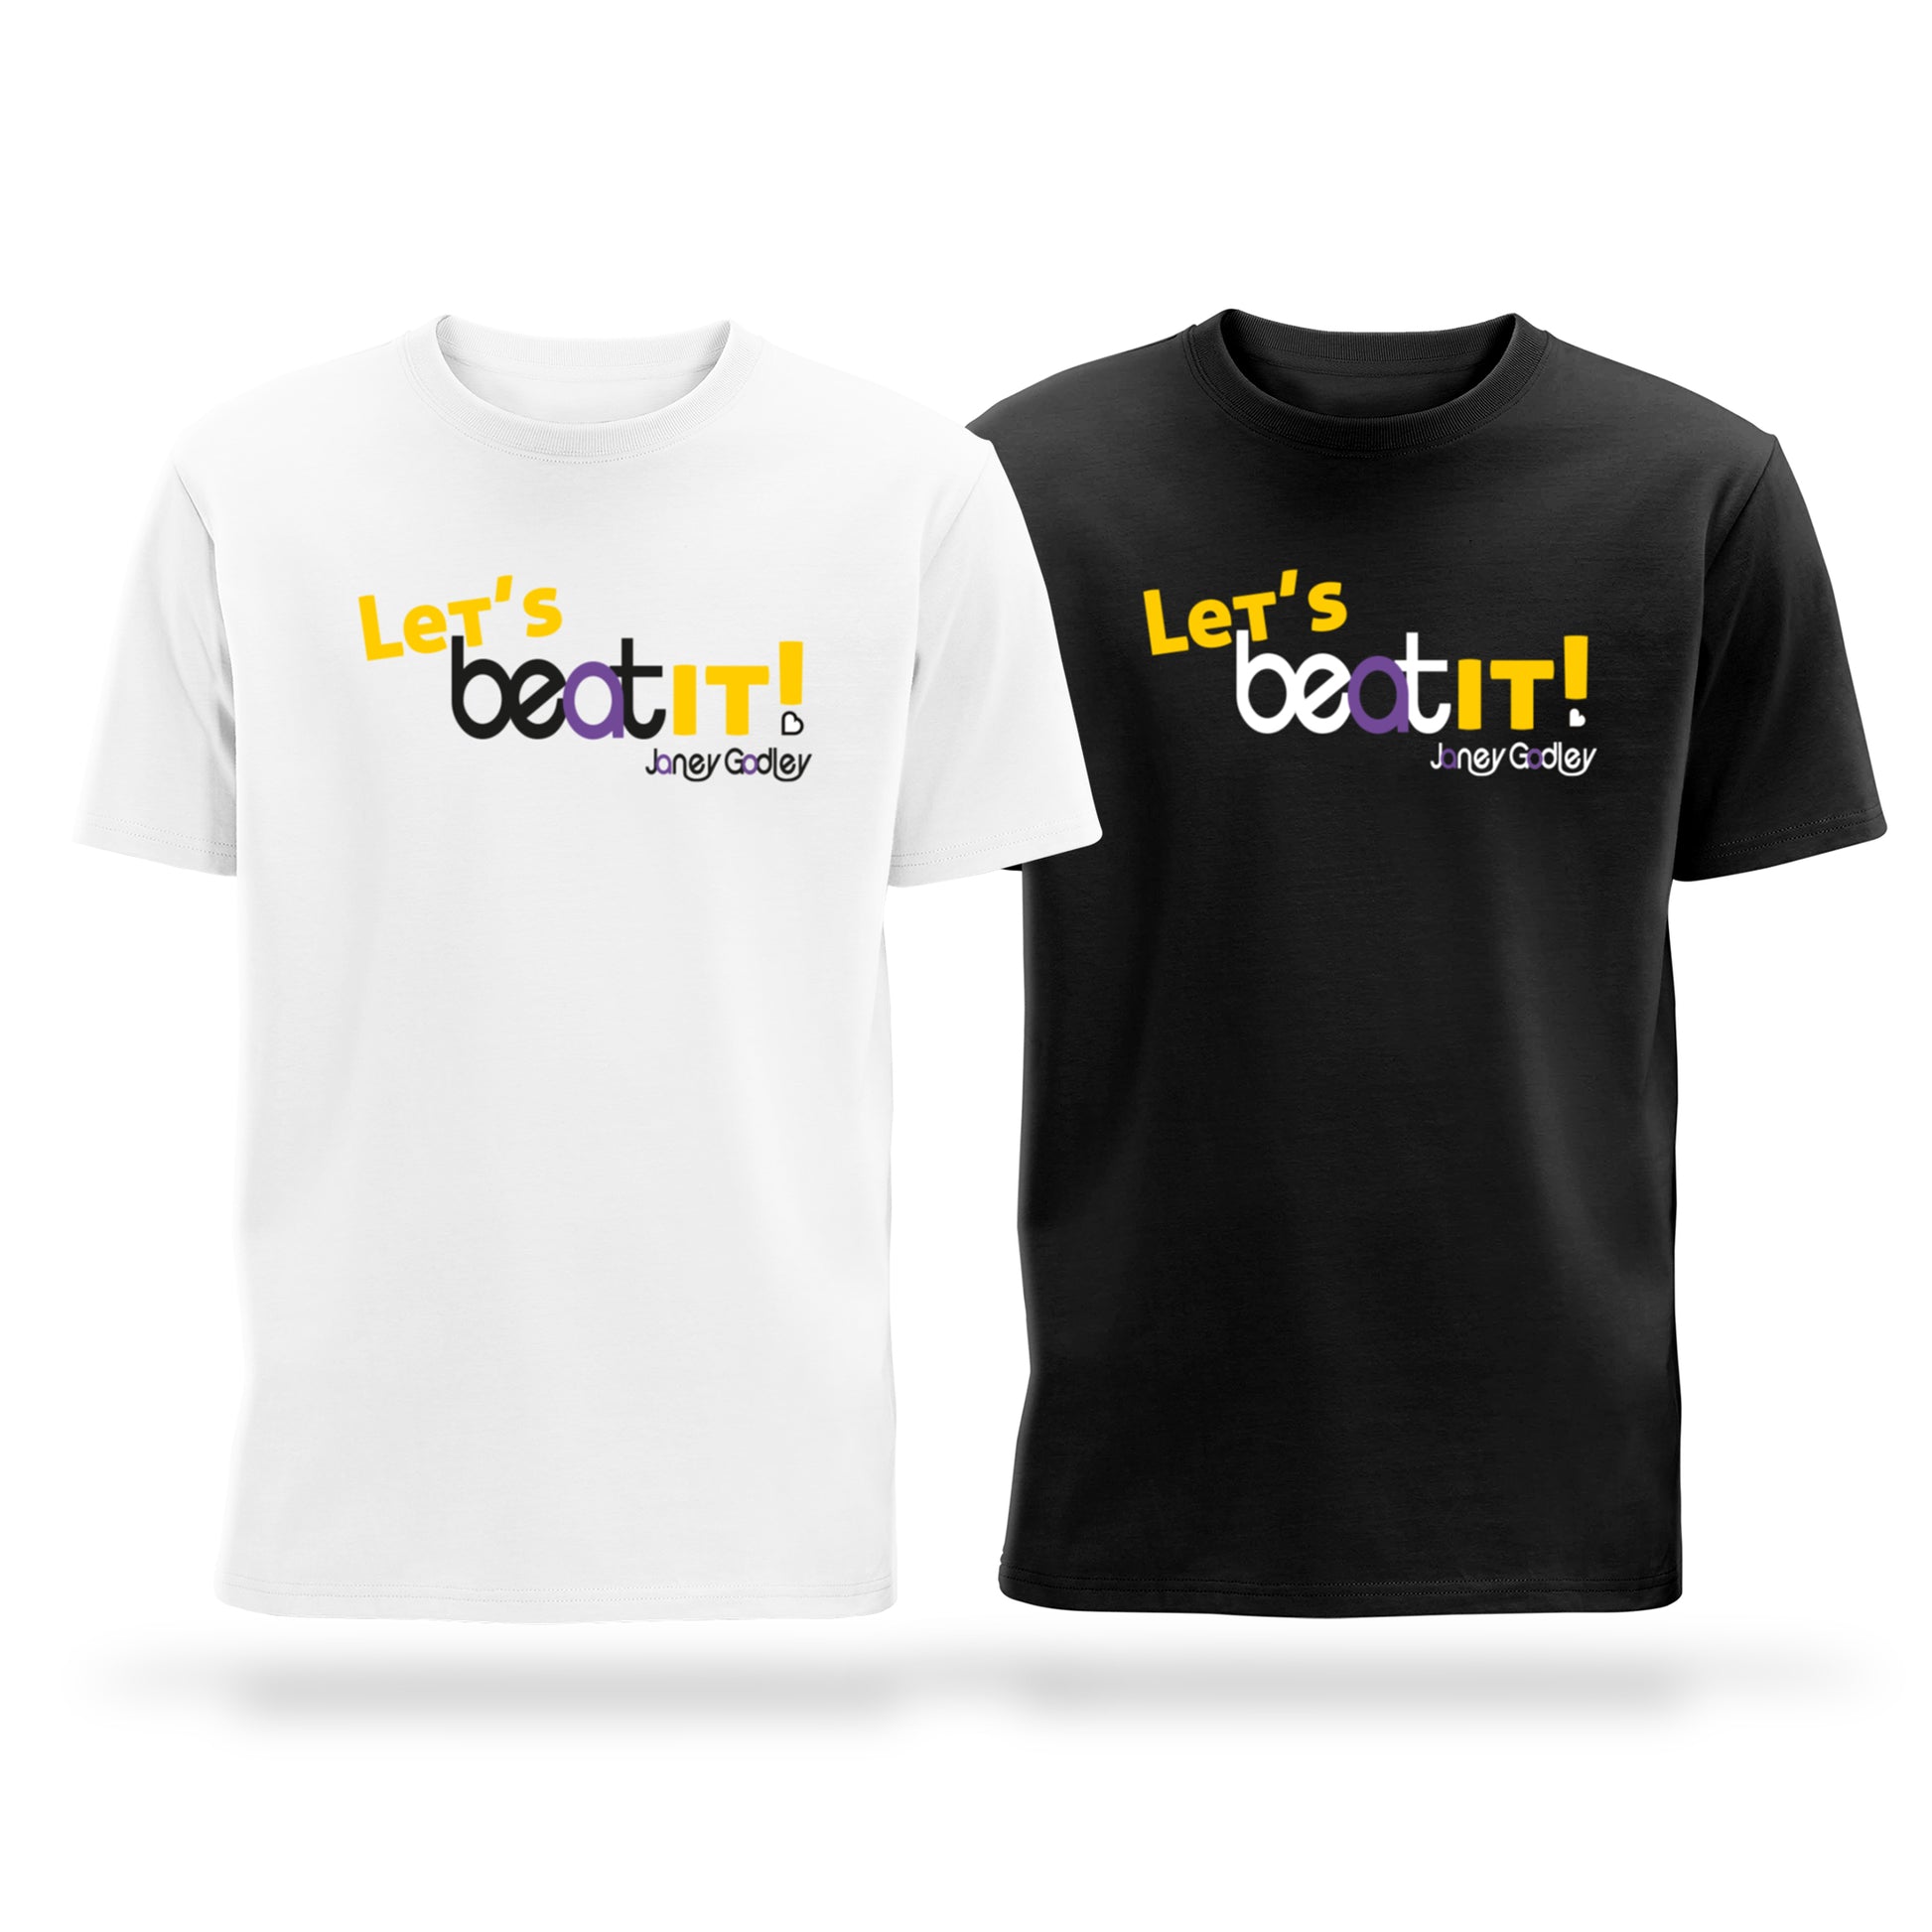 Janey Godley Let's Beat It T-Shirt available in Black or white for Beatson Cancer Charity